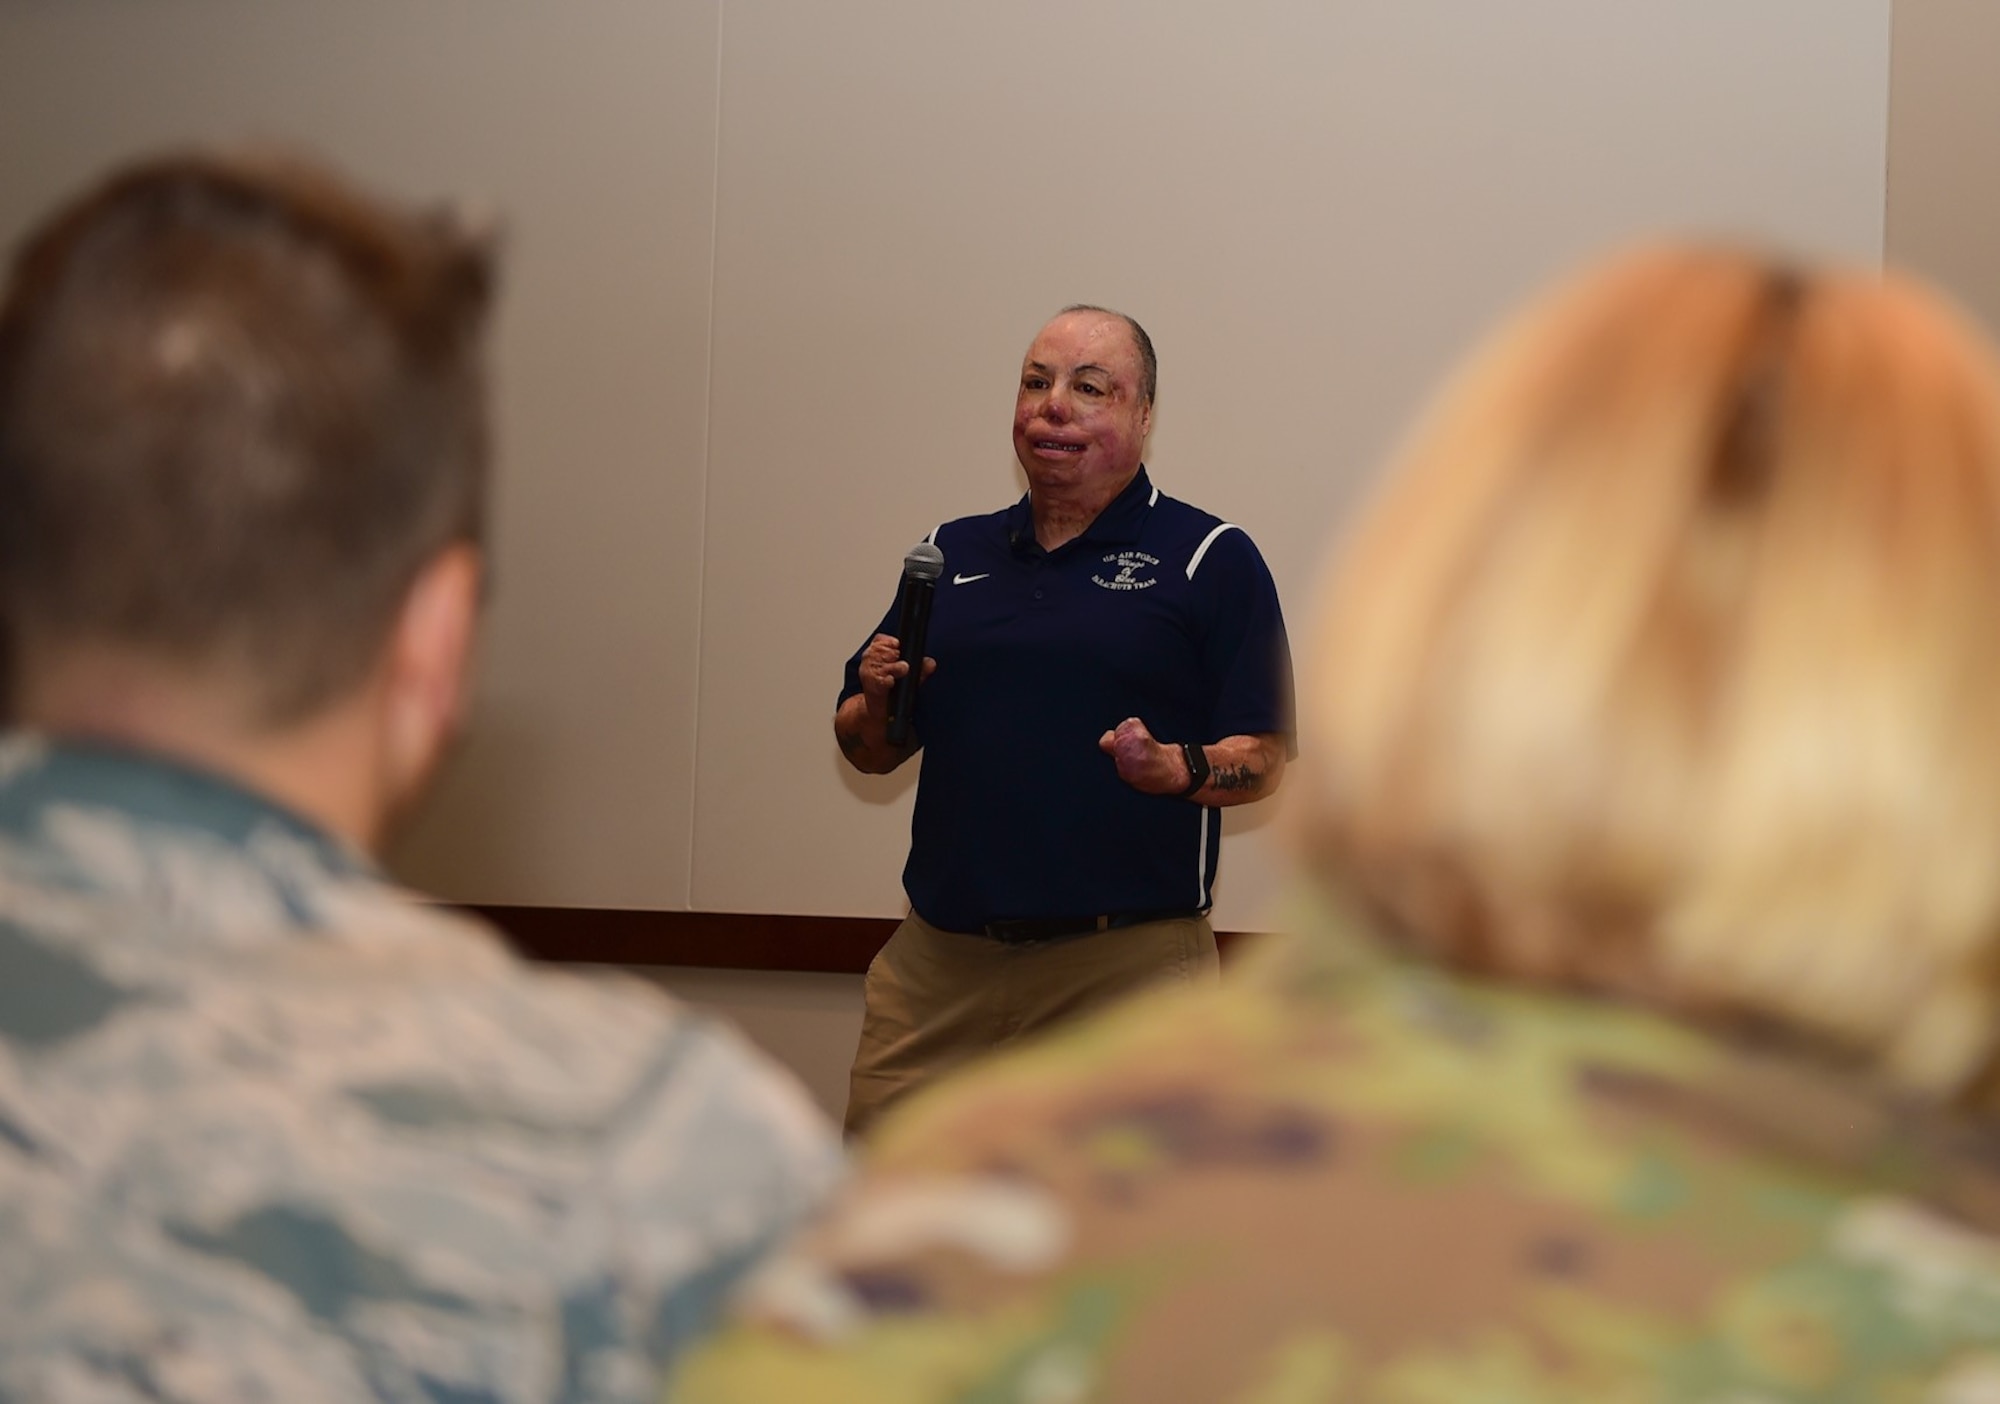 Senior Master Sgt. Israel Del Toro, 98th Flying Training Squadron accelerated freefall training program superintendent, shares his story of overcoming adversity with members of Team Buckley, Dec. 20, 2018, at Buckley Air Force Base, Colo. Del Toro was injured in Afghanistan, Dec. 4, 2005, and became the first 100 percent disabled Airman to reenlist in the Air Force on Feb. 8, 2010. (U.S. Air Force photo by Airman 1st Class Michael D. Mathews)